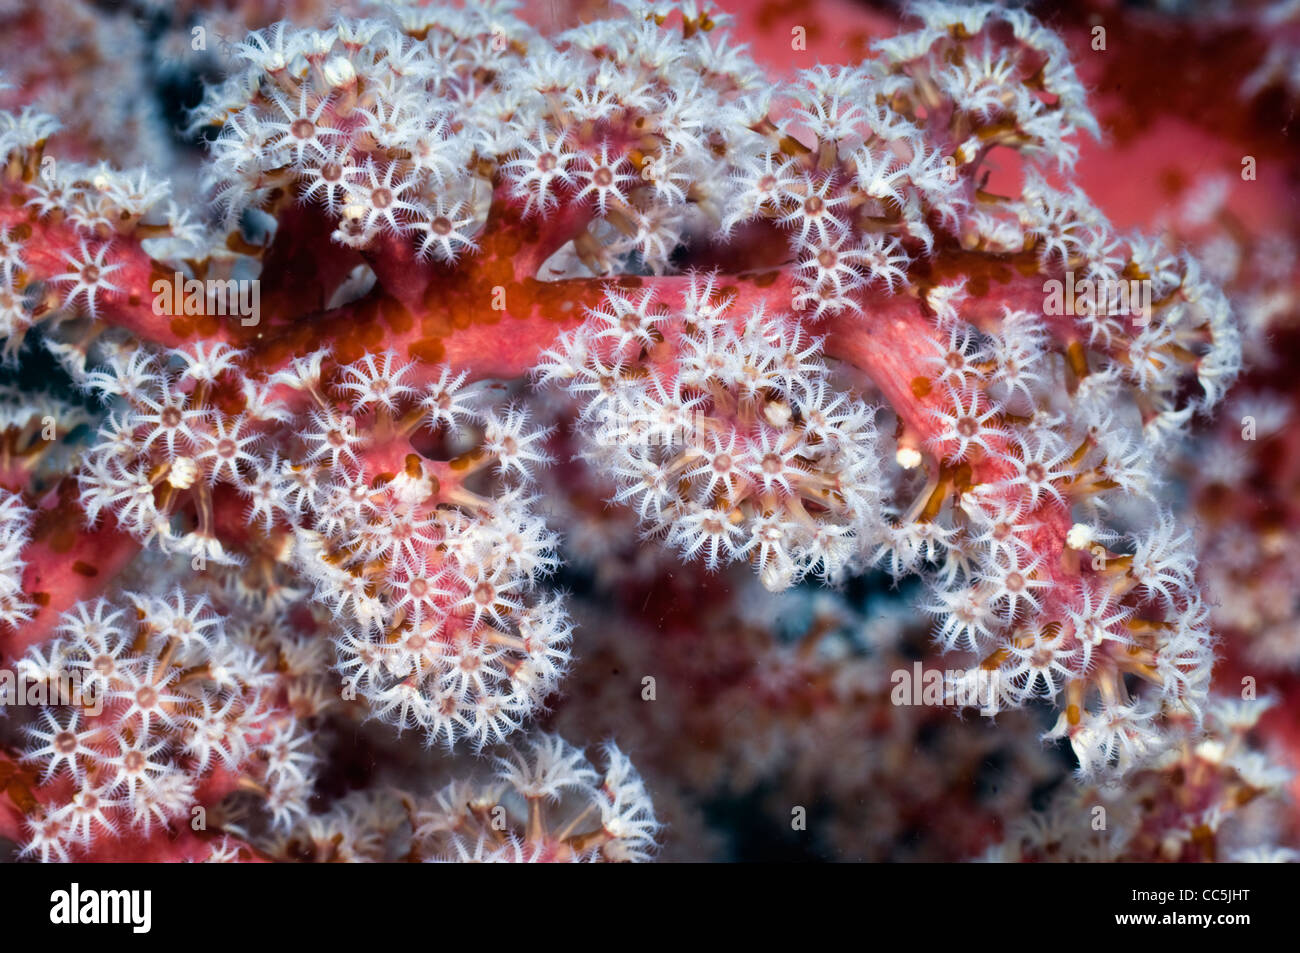 Pink soft coral with polyps clustered on the end of the branches. Acoel flatworms on the branches and polyps. Indonesia. Stock Photo